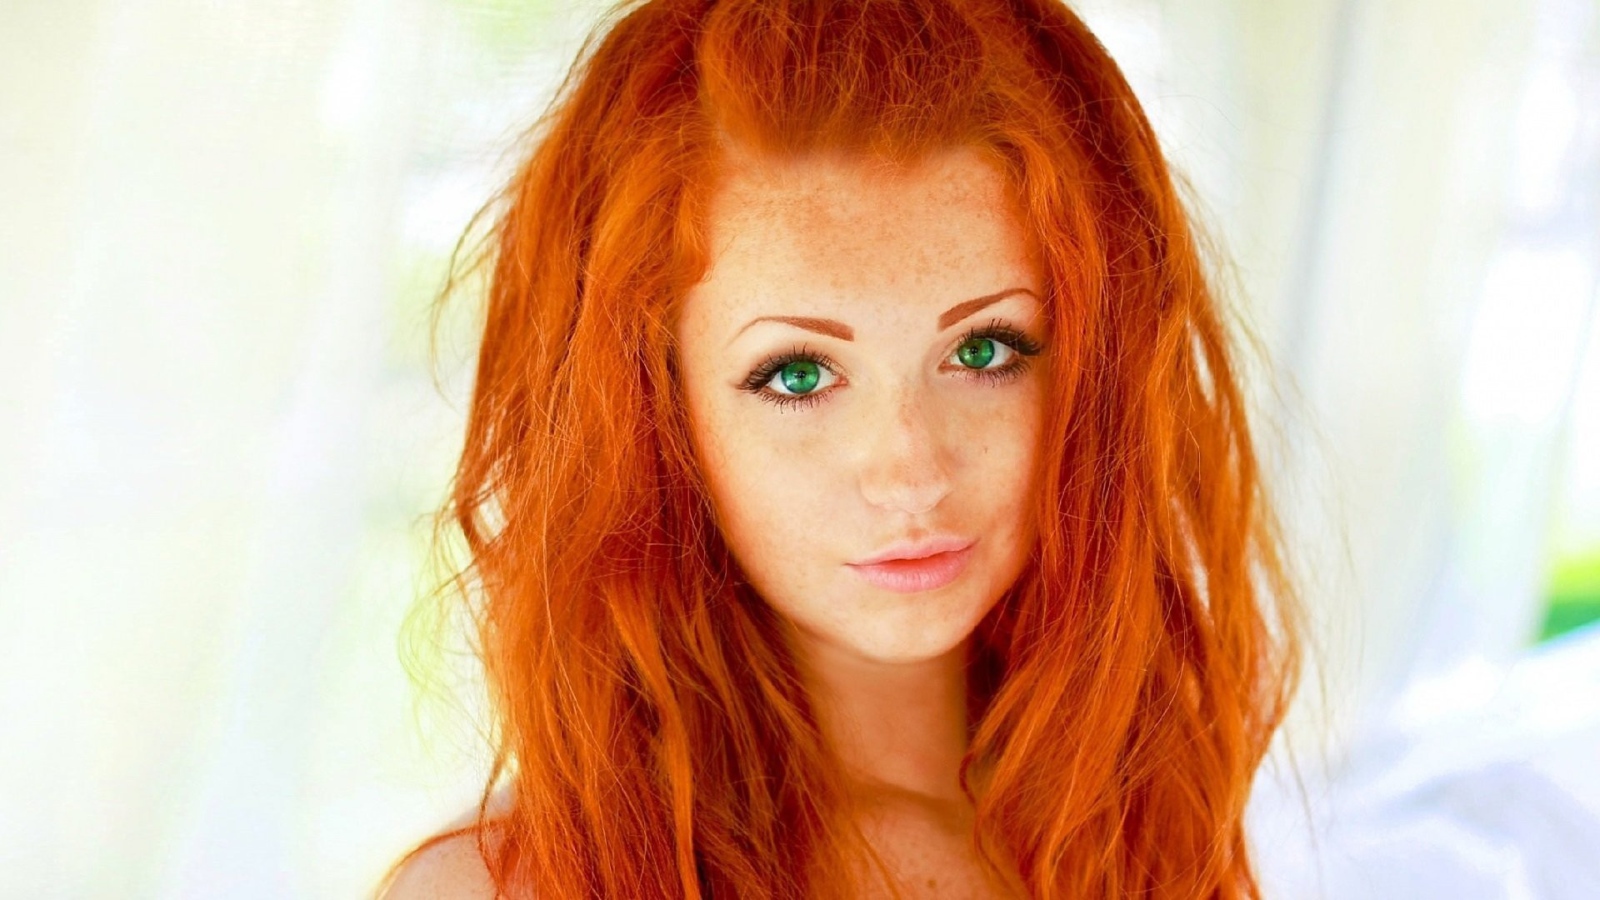 The red-haired model with green eyes